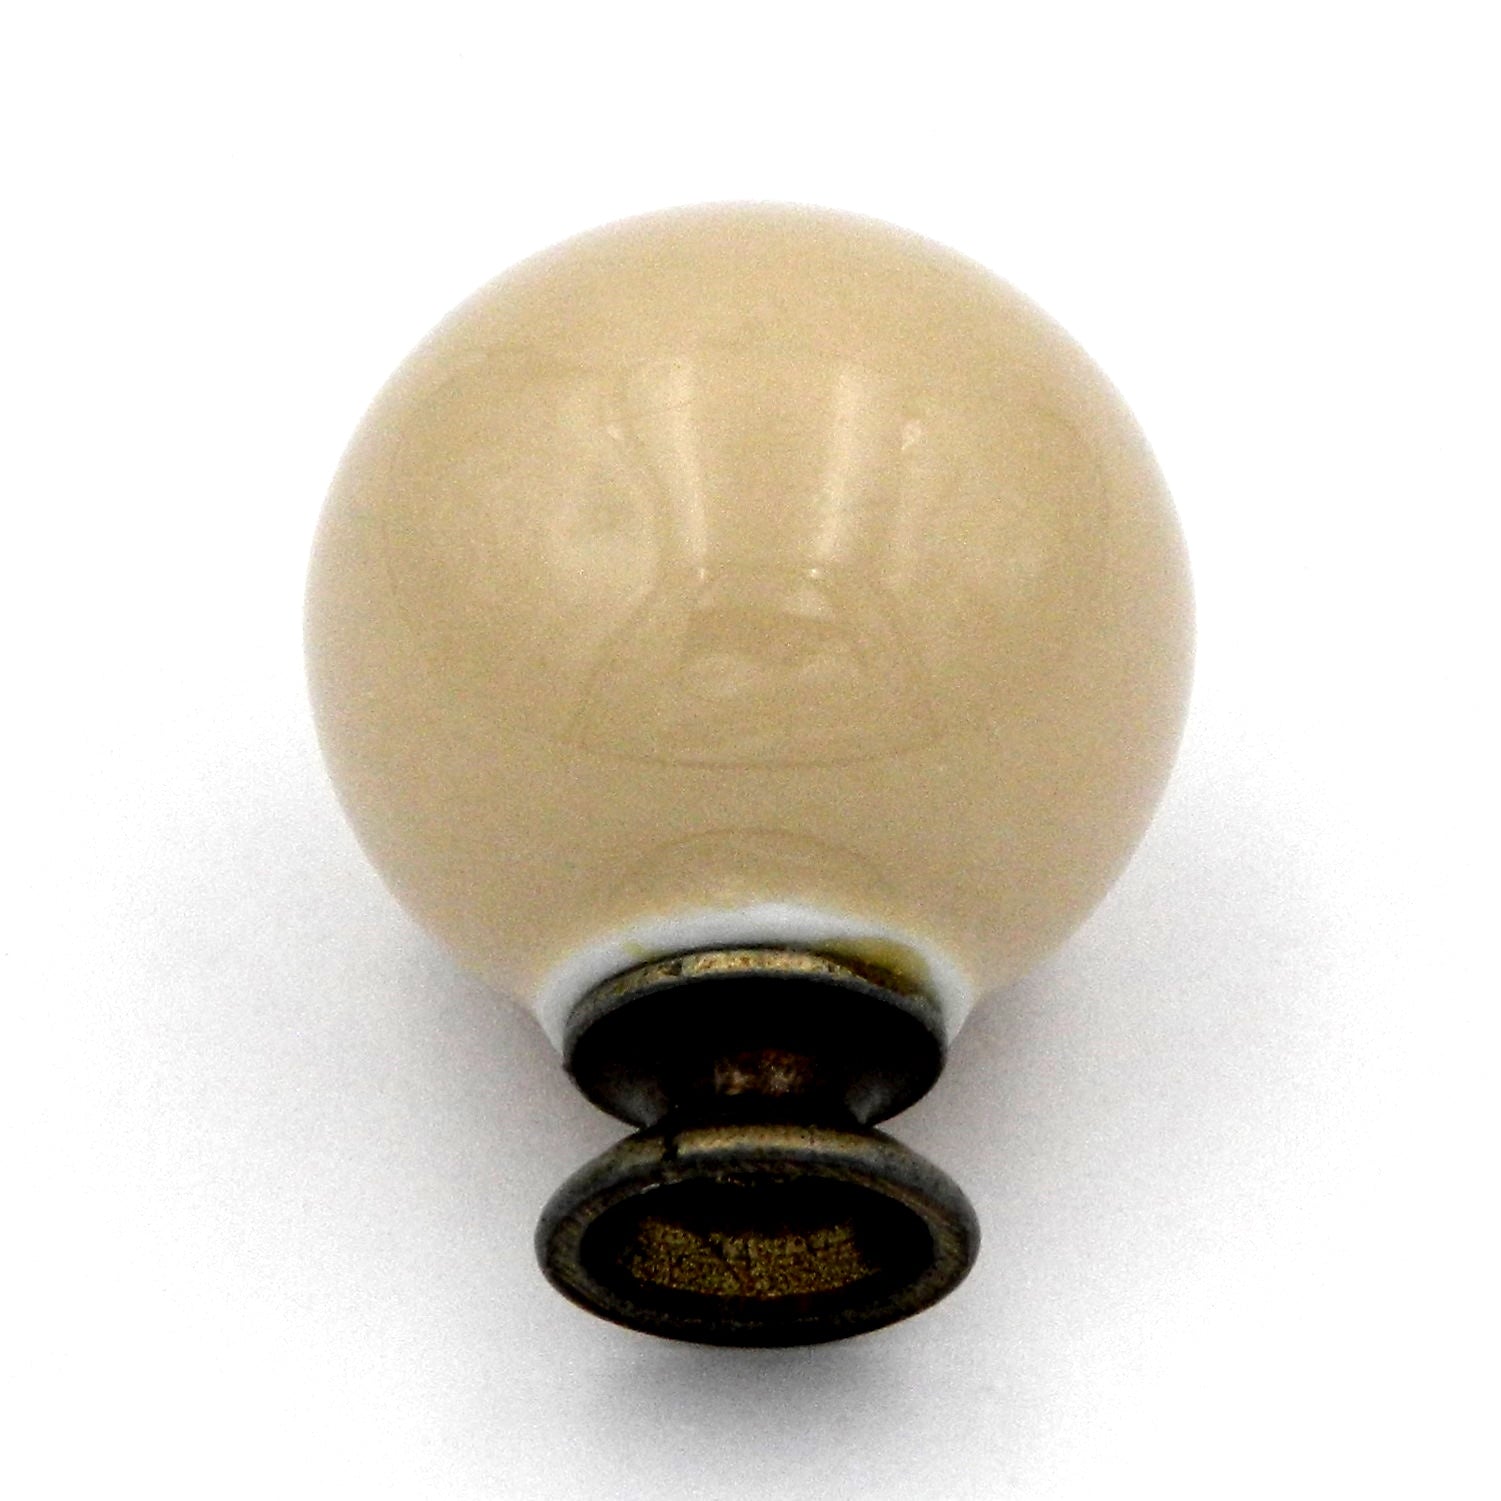 Belwith Hickory P21-AD Almond 1 1/4" Round Cabinet Knob Pull with Brass Base